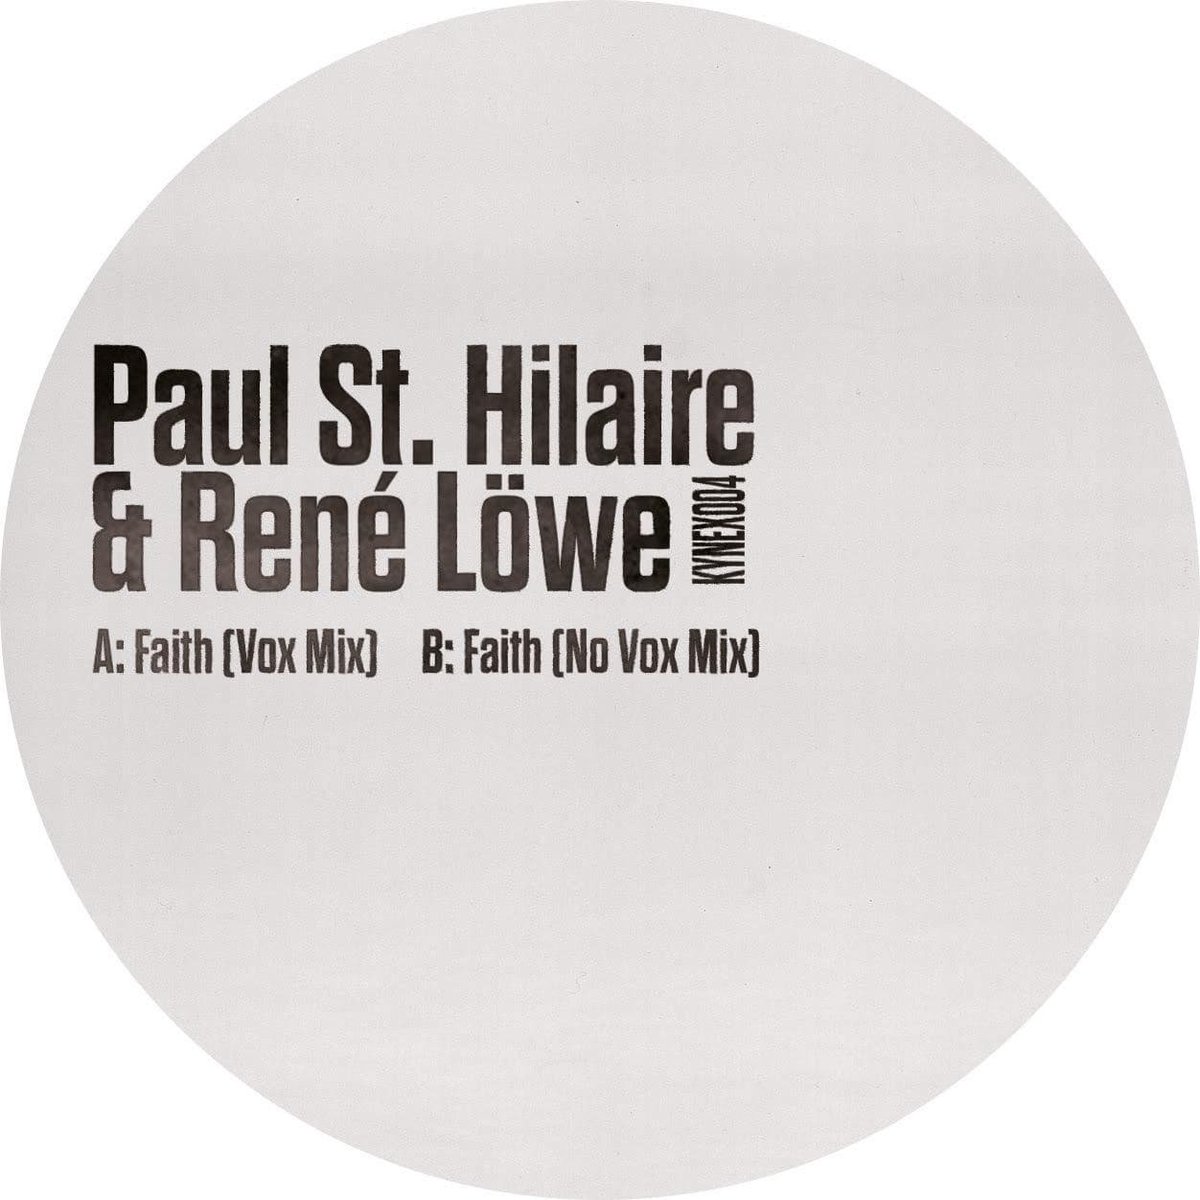 BACK IN STOCK: 'Faith' by Paul St. Hilaire & René Löwe Dub techno bliss - an essential 12'' for anyone into the subgenre. Mastered by Moritz von Oswald, released on Kynant EX. @kynantrecords normanrecords.com/records/202737…